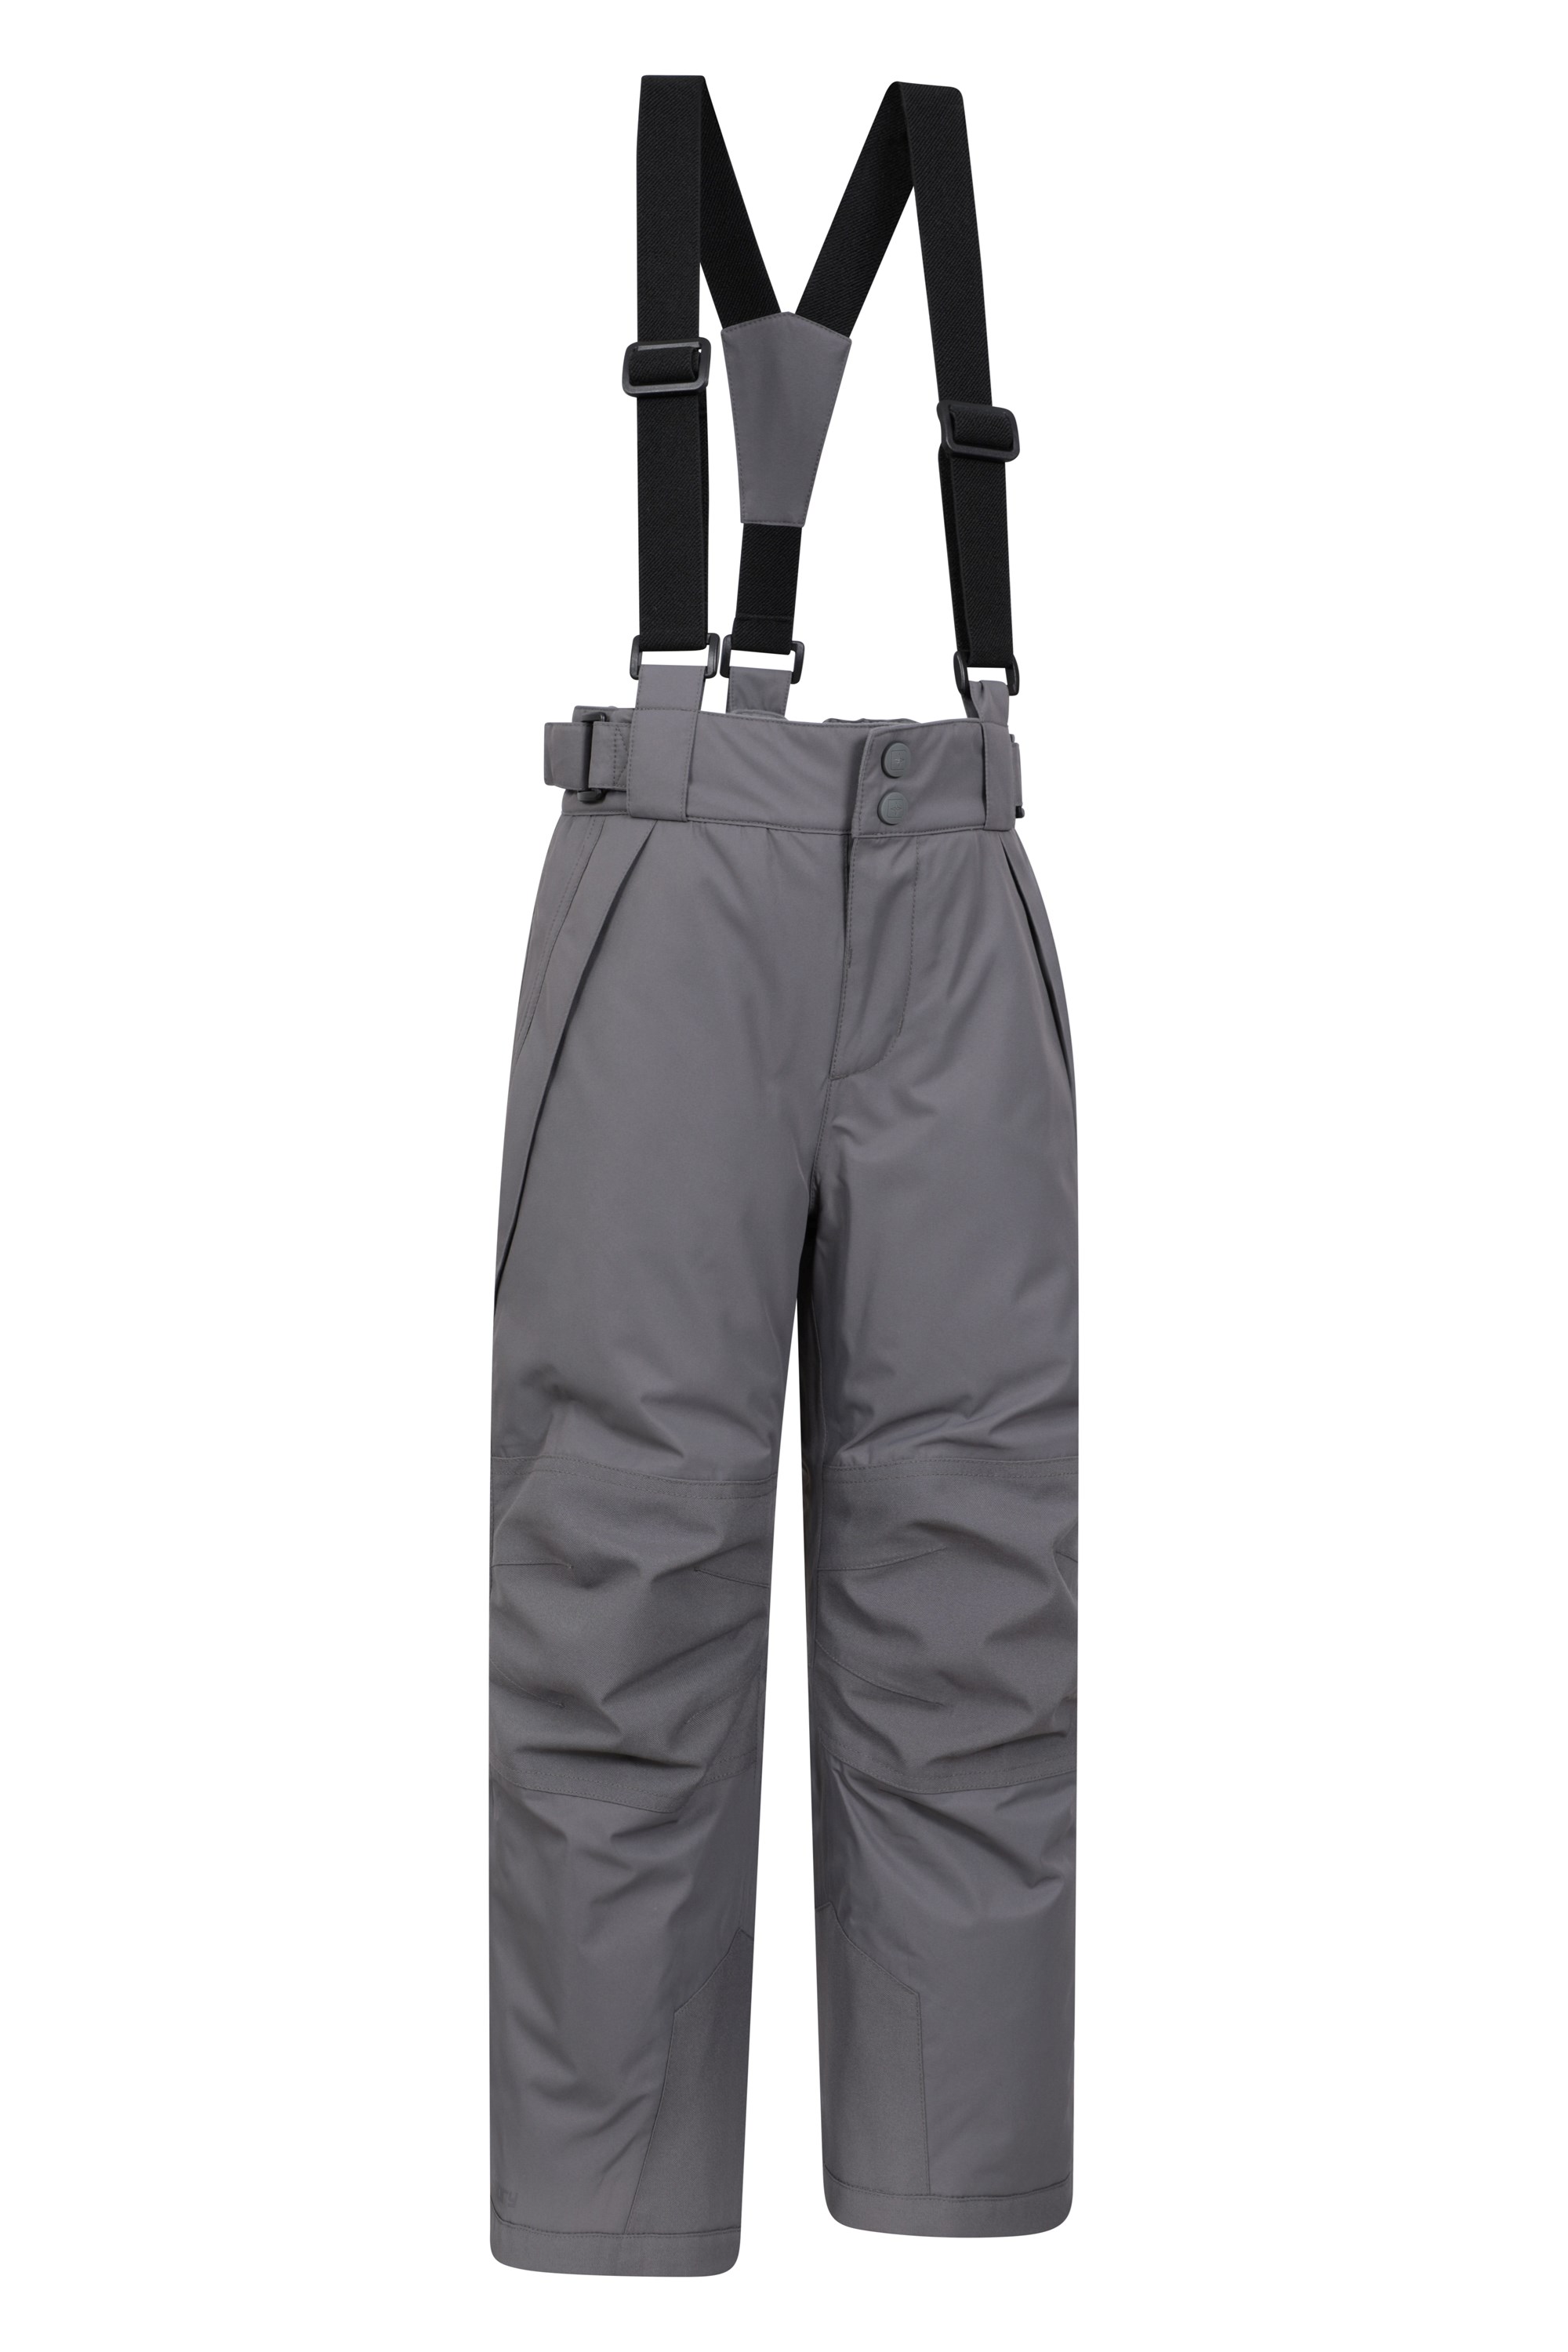 Kids Snow Stoppers Snow Pants